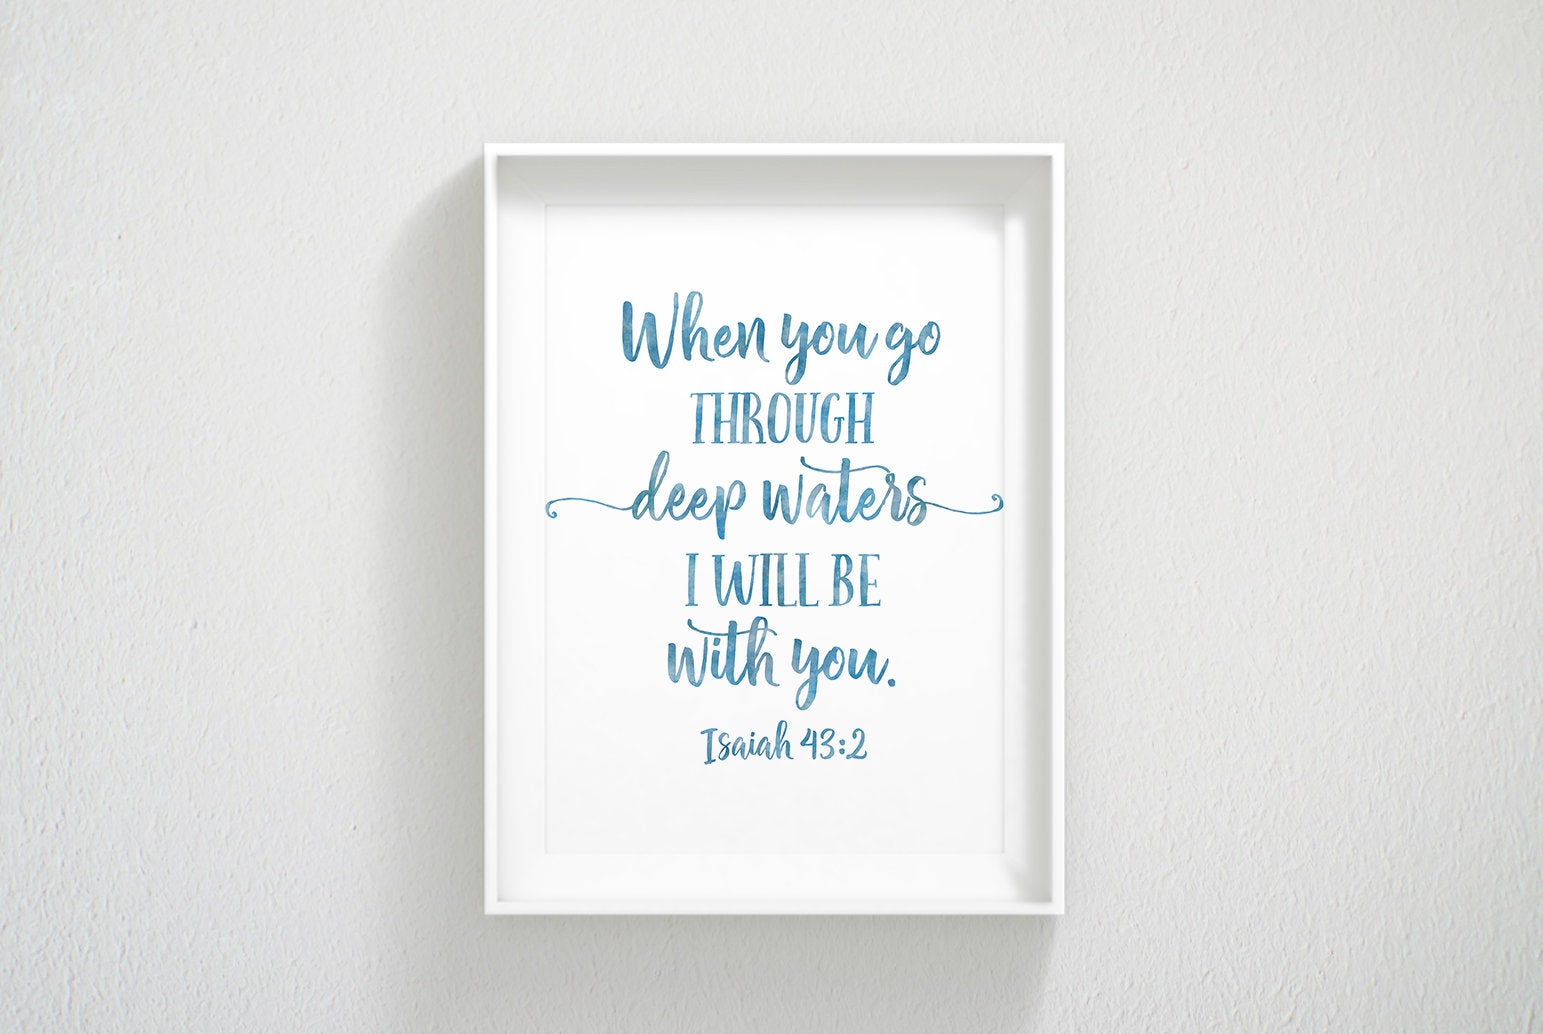 When You Go Through Deep Waters I'll Be With You, Isaiah 43:2, Bible Quote Scripture Print